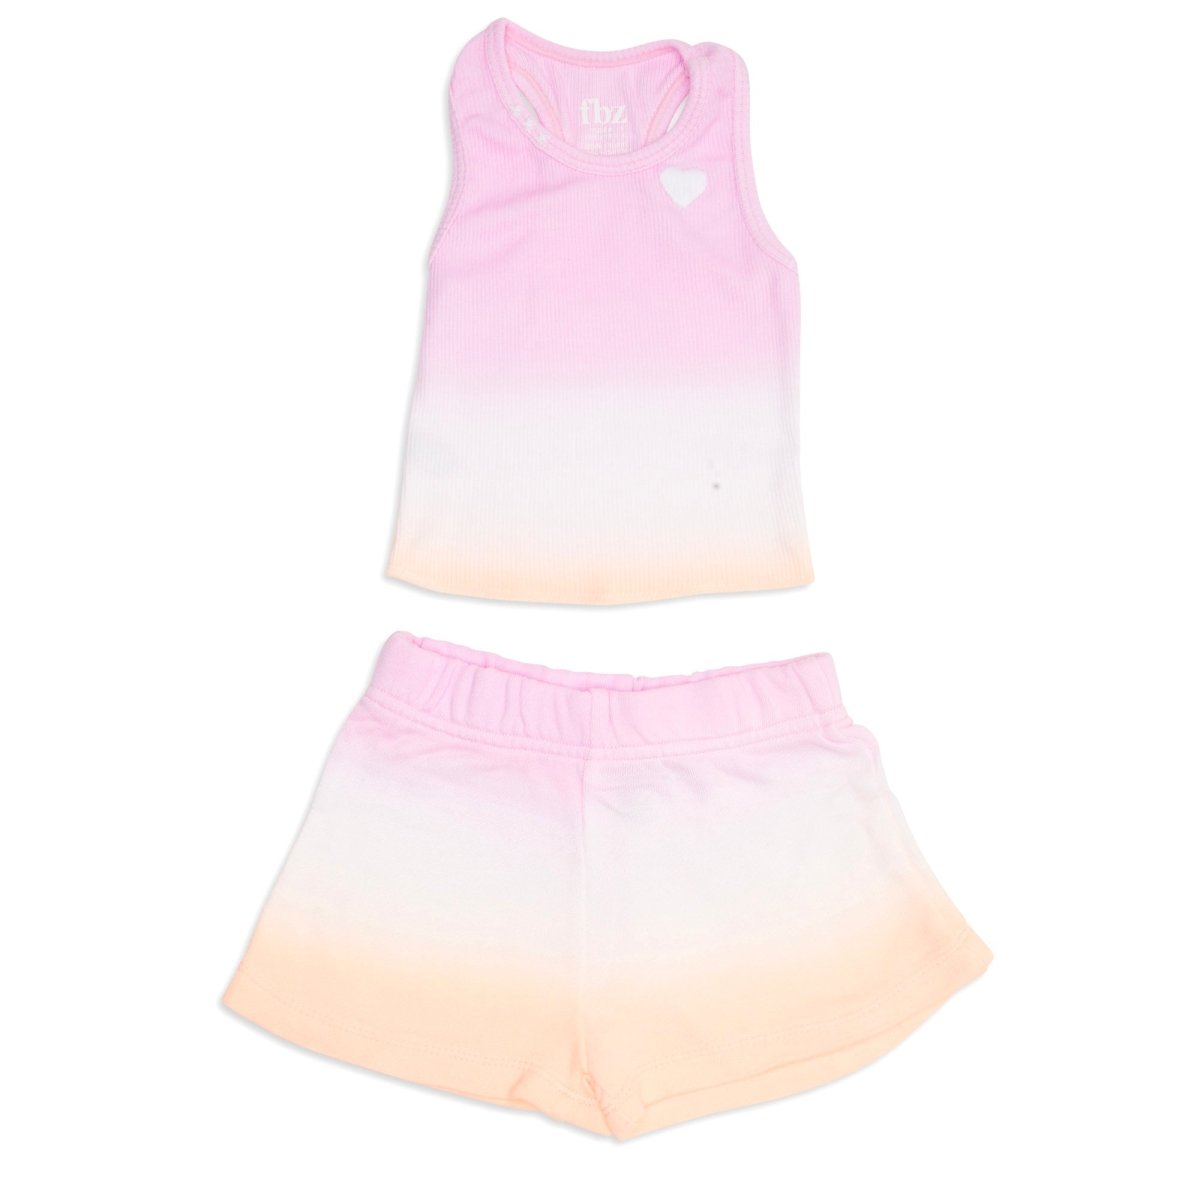 HEART OMBRÉ TANK TOP AND SHORTS SET - FLOWERS BY ZOE